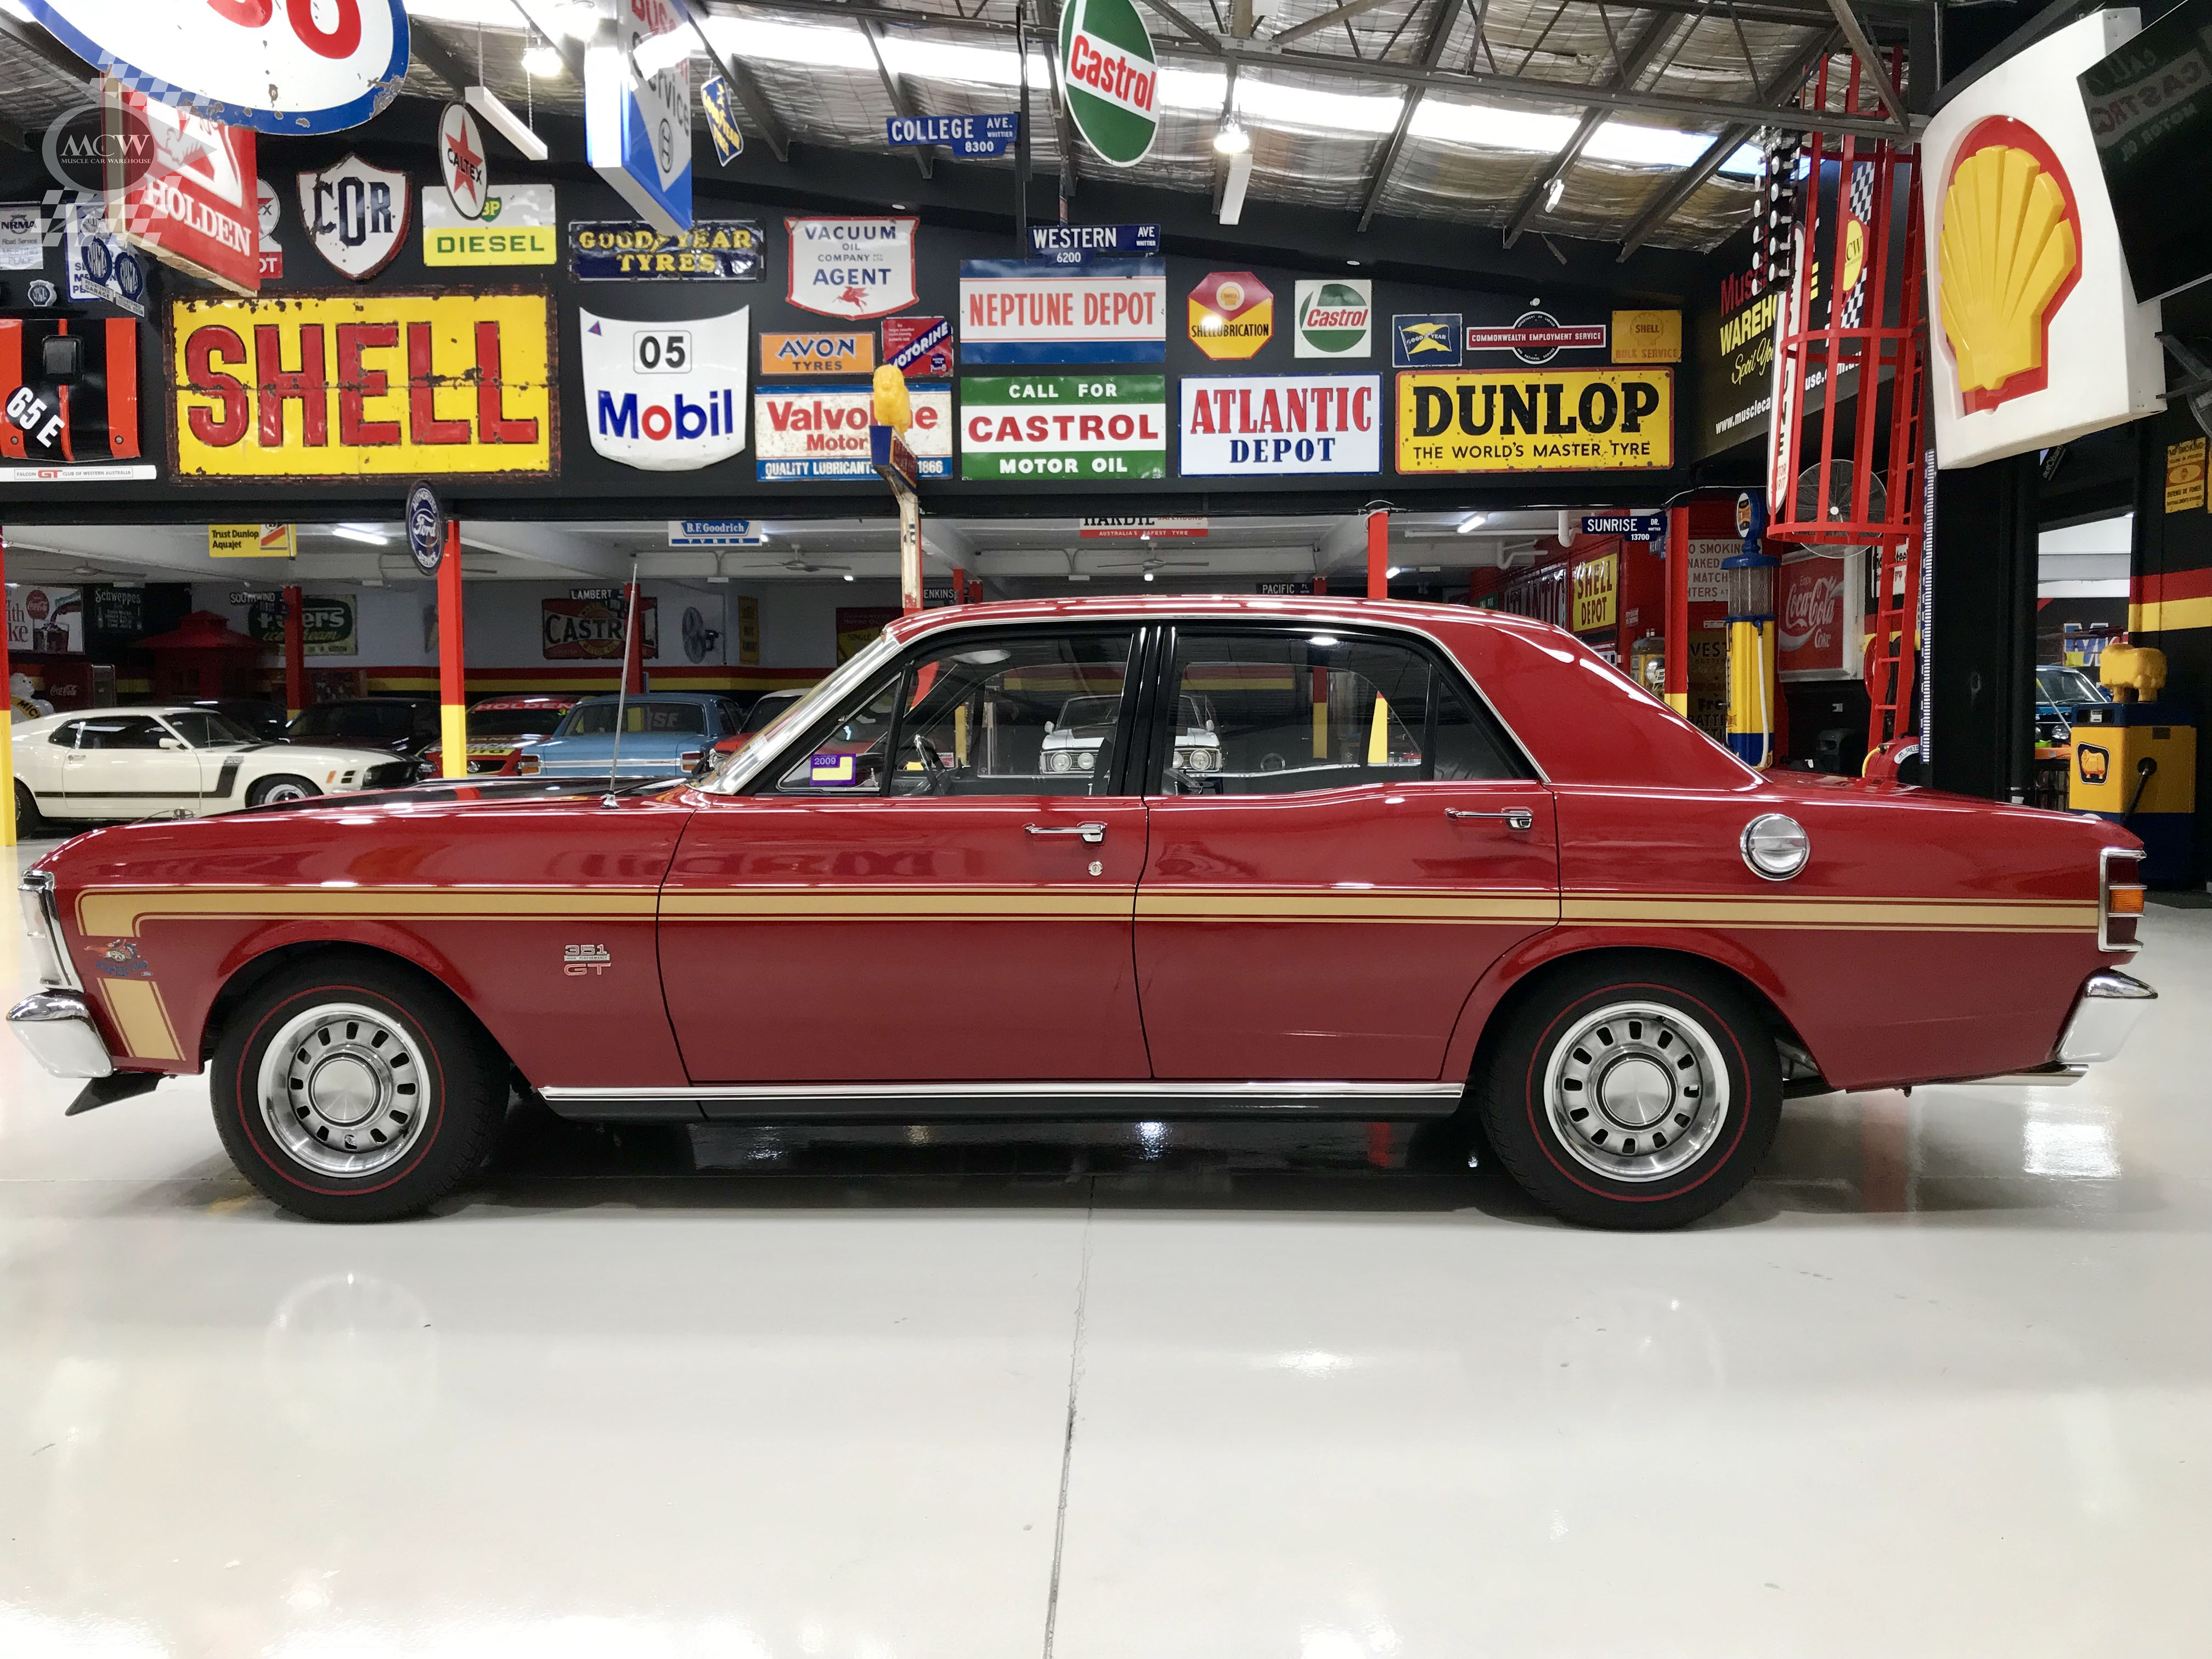 Ford Falcon XW GT Candy Apple Red | Muscle Car Warehouse